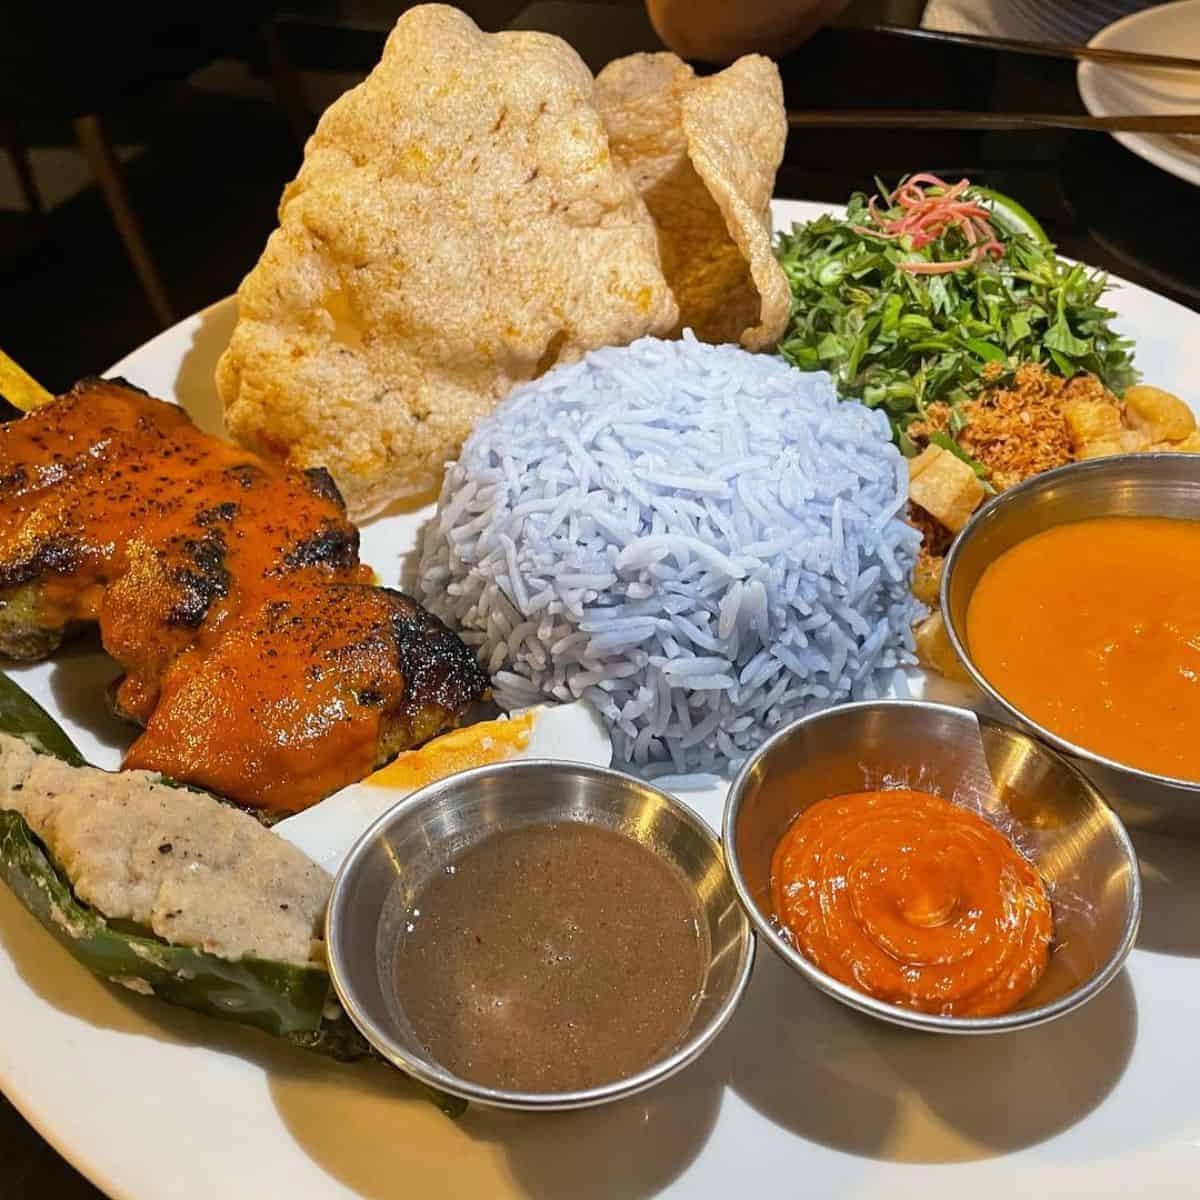 Delicious Nasi Kerabu with grilled meat, salad, and three different sauces